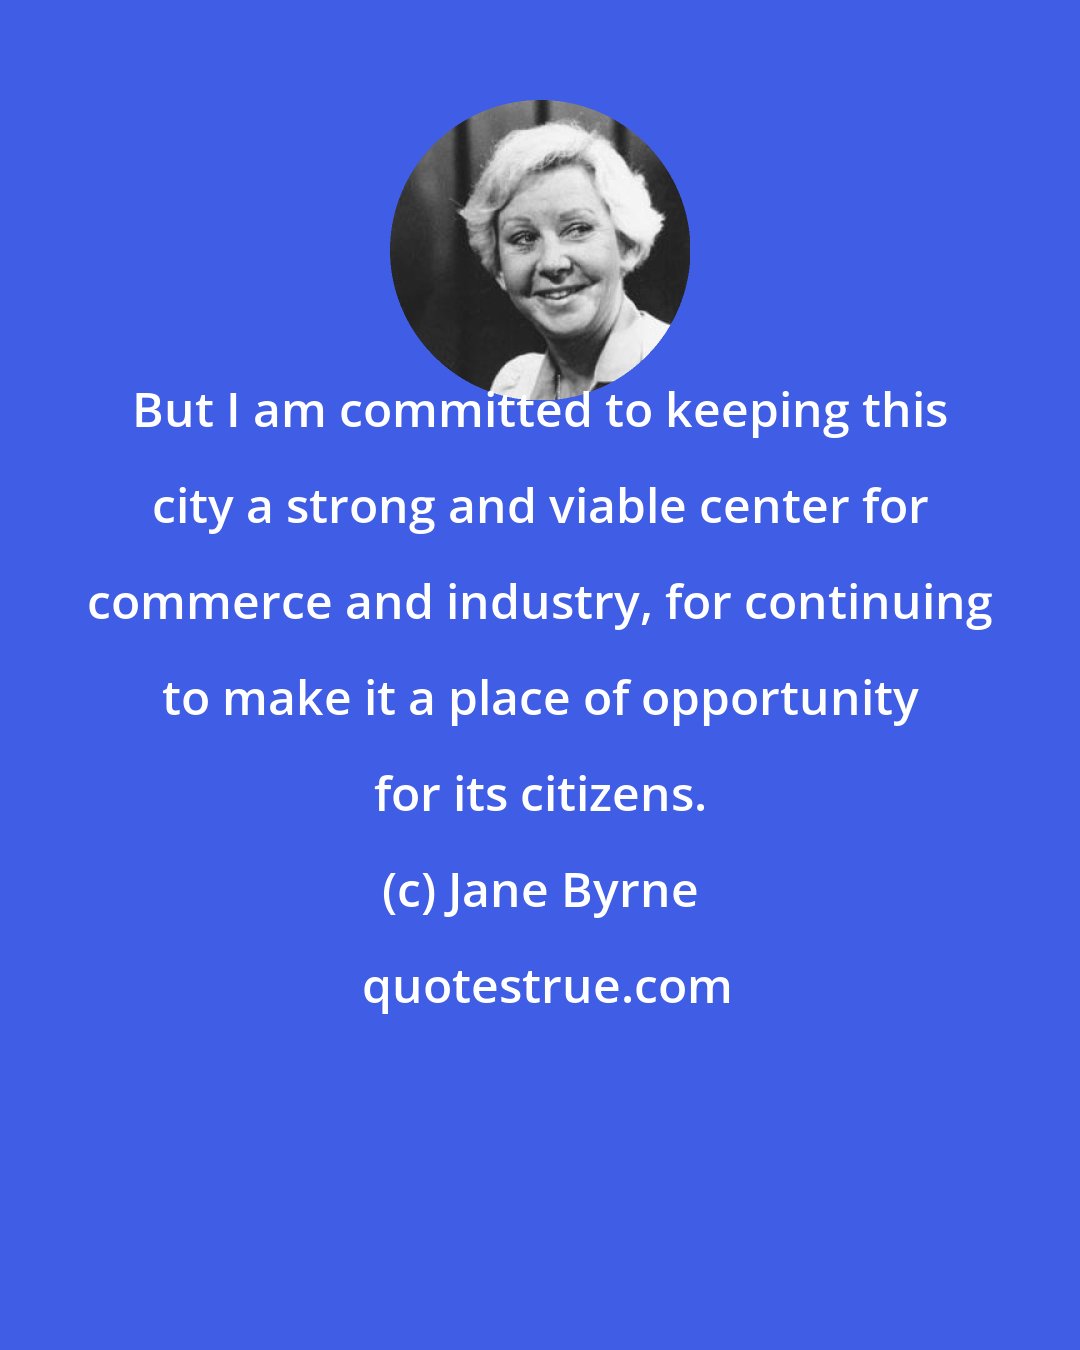 Jane Byrne: But I am committed to keeping this city a strong and viable center for commerce and industry, for continuing to make it a place of opportunity for its citizens.